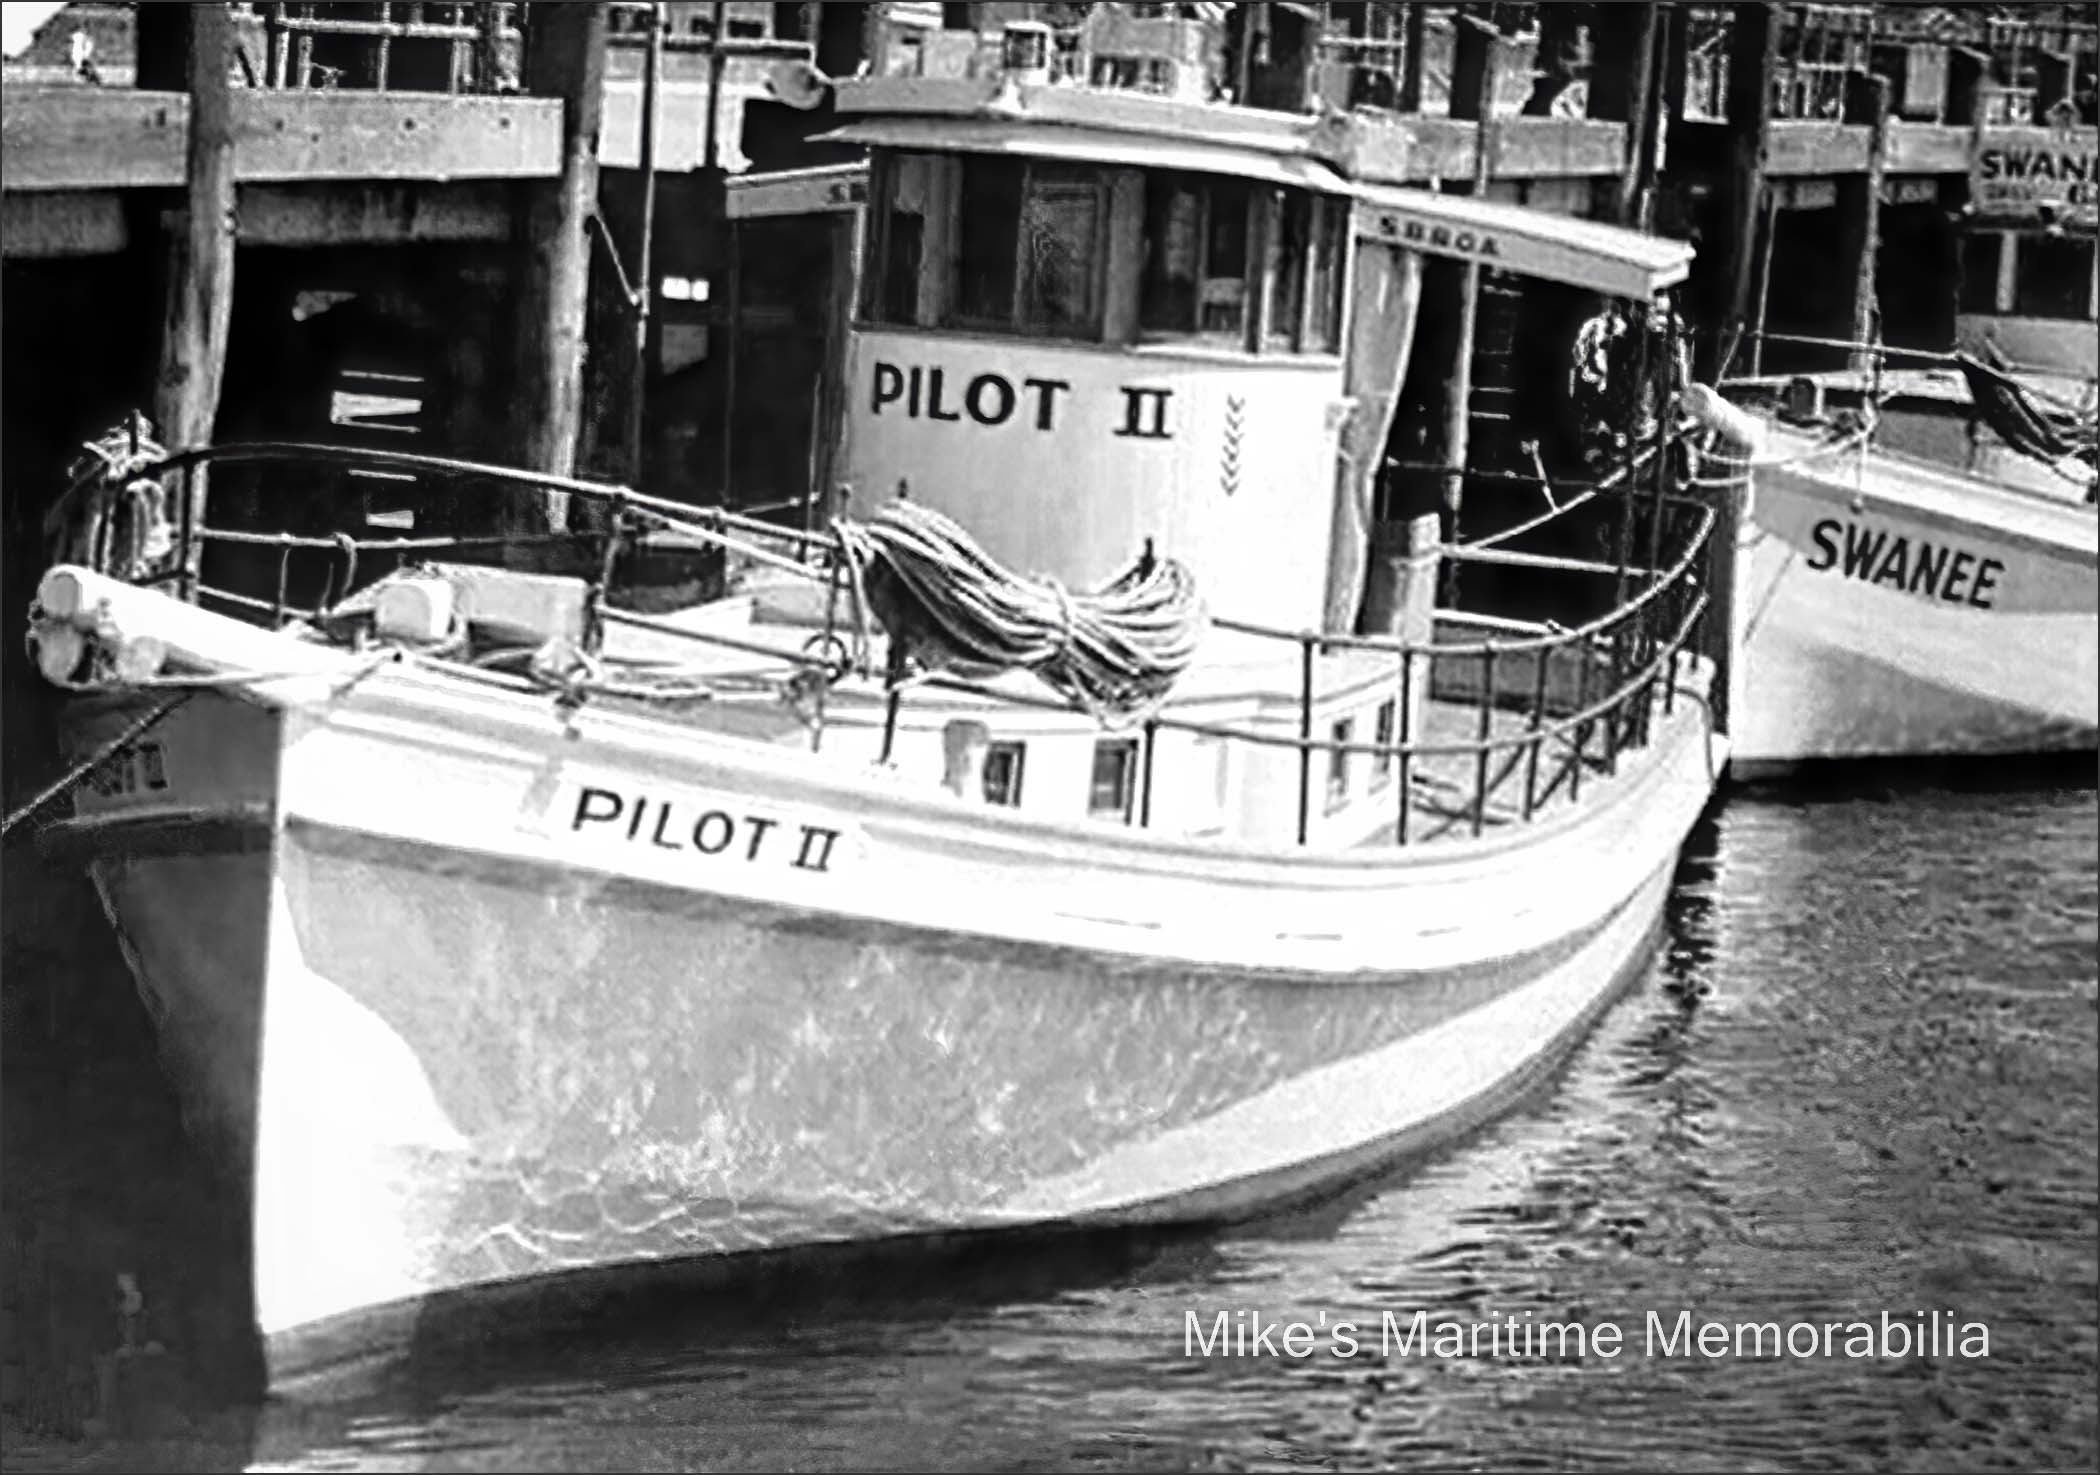 PILOT II, Brooklyn, NY – 1949 Captain Harry Phillips' "PILOT II" and Captain Otto Behensky's "SWANEE" at Pier 7, Sheepshead Bay, Brooklyn, NY circa 1949. Ernest Fiedler built the "PILOT II" in 1937, and the "SWANEE" was built in 1938 at Patchogue, NY. Notice the chevrons painted on the wheelhouse of the "PILOT II". The government appropriated many local party boats during World War II for service as costal patrol boats and each chevron represents a year of military service. Also, the "PILOT II" was a member of the Sheepshead Bay Boat Owners Association as indicated by the "S.B.B.O.A." painted on her overhang. Years later, a young Tom Marconi started his career as a mate on this boat. Captain Phillips became Tom's mentor and sold the business to him when he retired in 1974. The "SWANEE" would later be owned by Captain Fred Ardolino. Captain Ardolino later sold her to Captain Charlie Roth who relocated her to Gerritsen Beach, Brooklyn, NY where she sailed as the "WOODEN SHOE II".